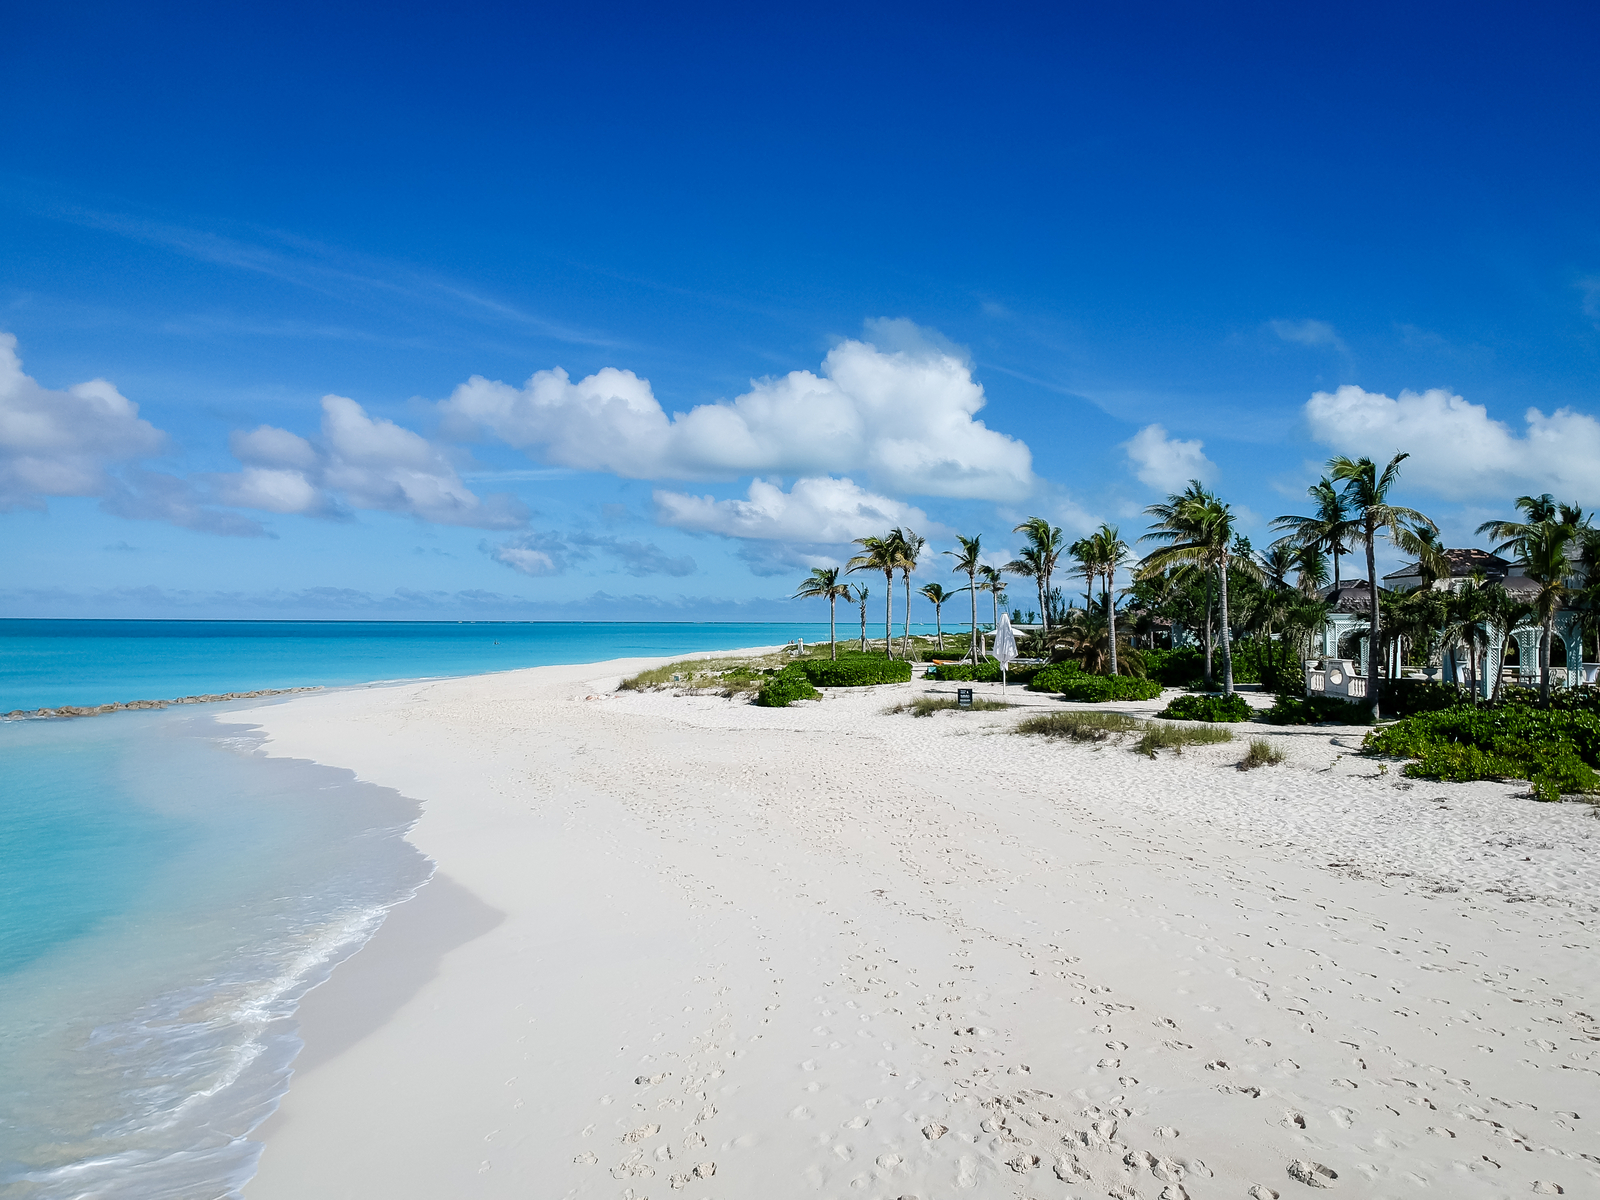 Grace Bay, one of the best places to stay in Turks and Caicos, pictured while walking along the beach